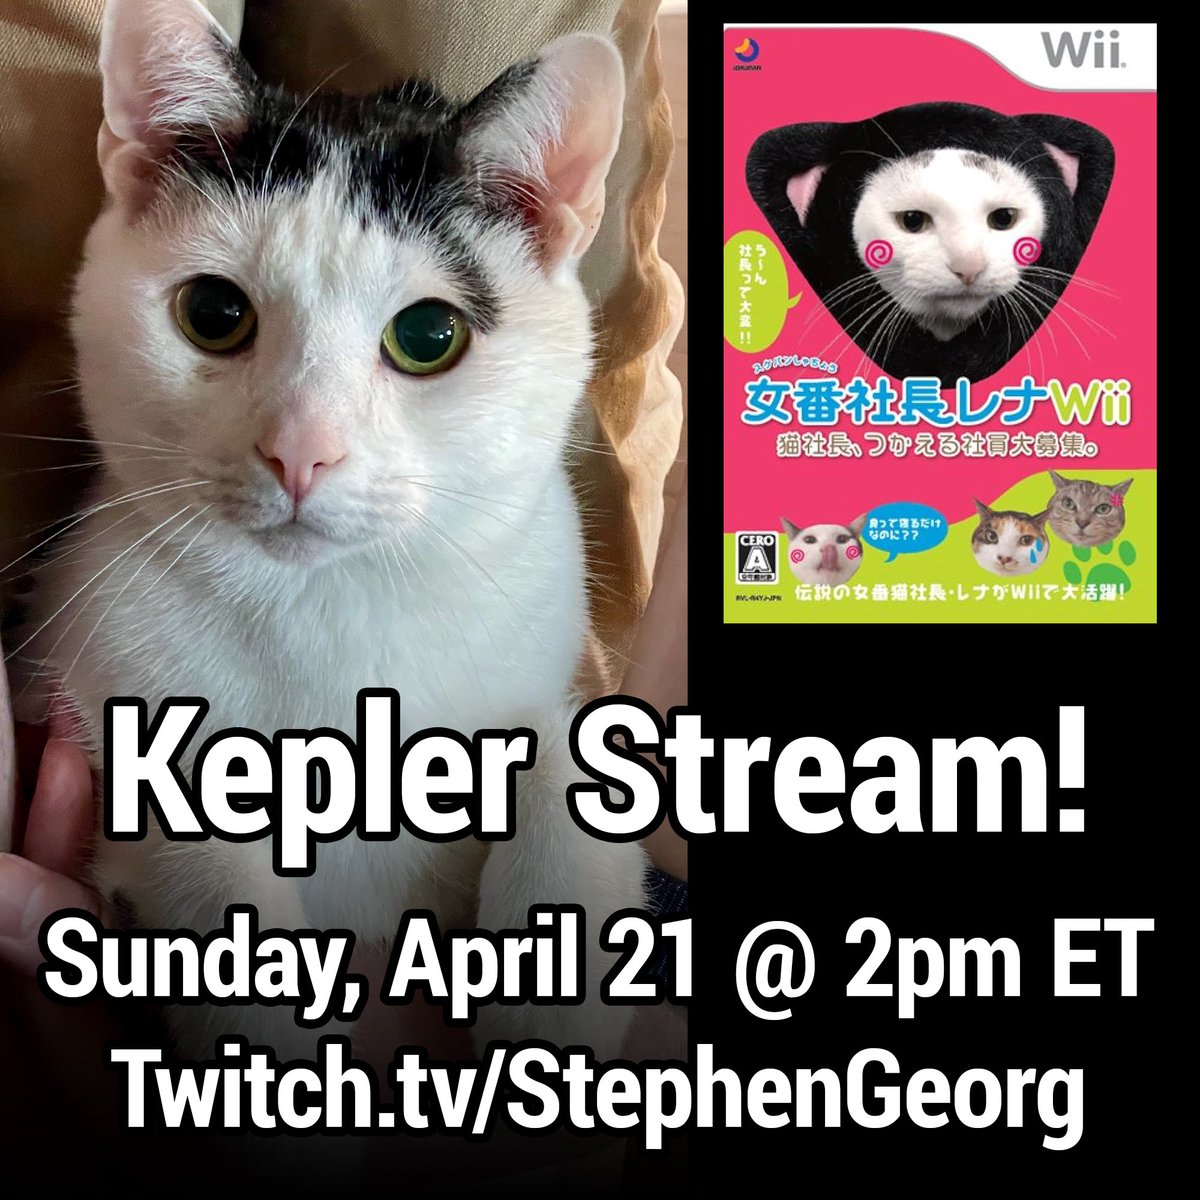 Hey folks, we’re doing a special livestream today for Kep, to help offset his vet bills. If you’d like to come hang out and see one of the worst-selling Wii games of all time, we’re live now! 🔴 twitch.tv/stephengeorg